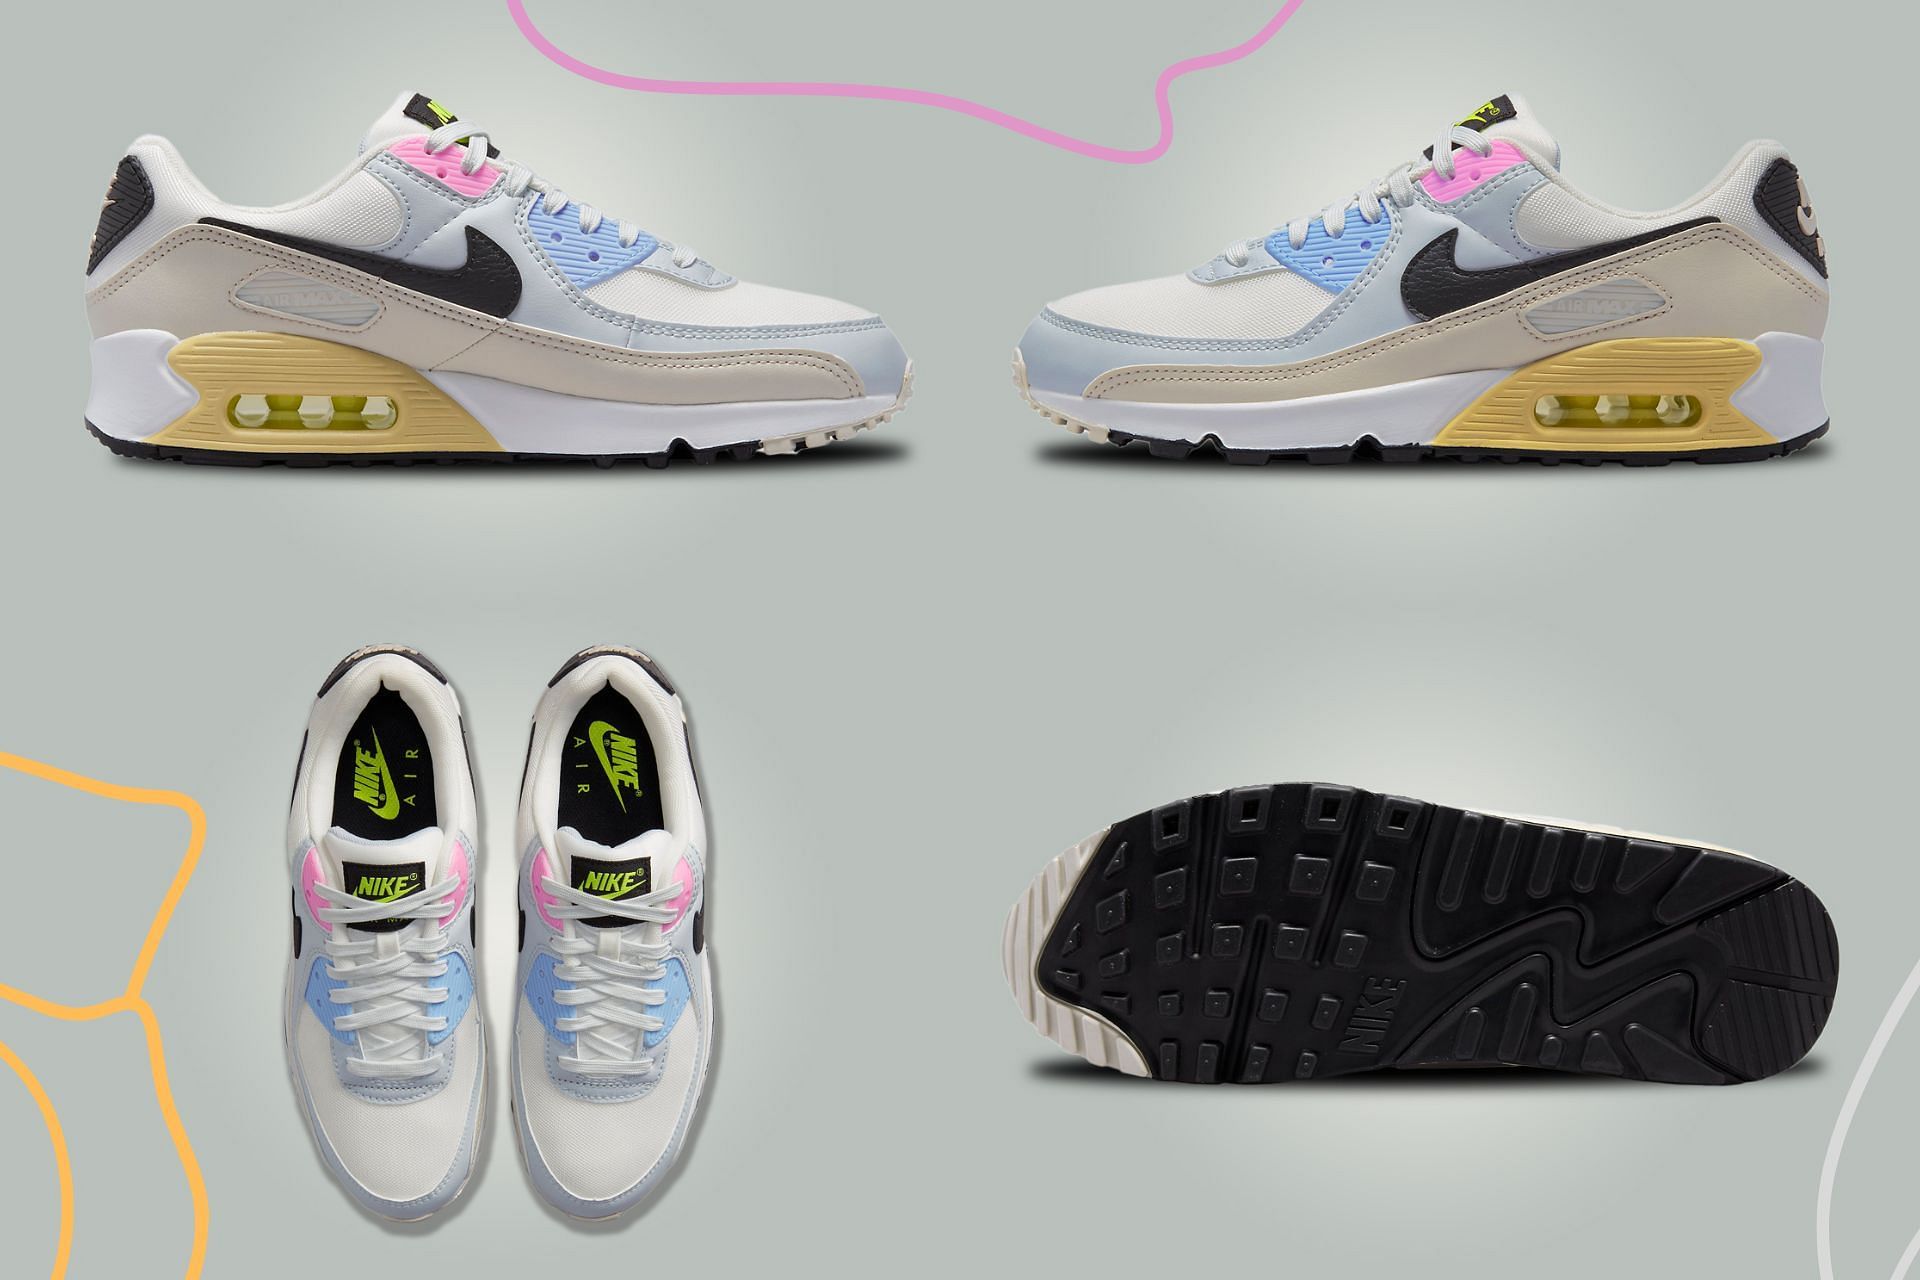 The newly released Nike Air Max 90 Multi &quot;Summit White Light Bone&quot; sneakers arrive clad in an Easter Day-themed color scheme (Image via Sportskeeda)